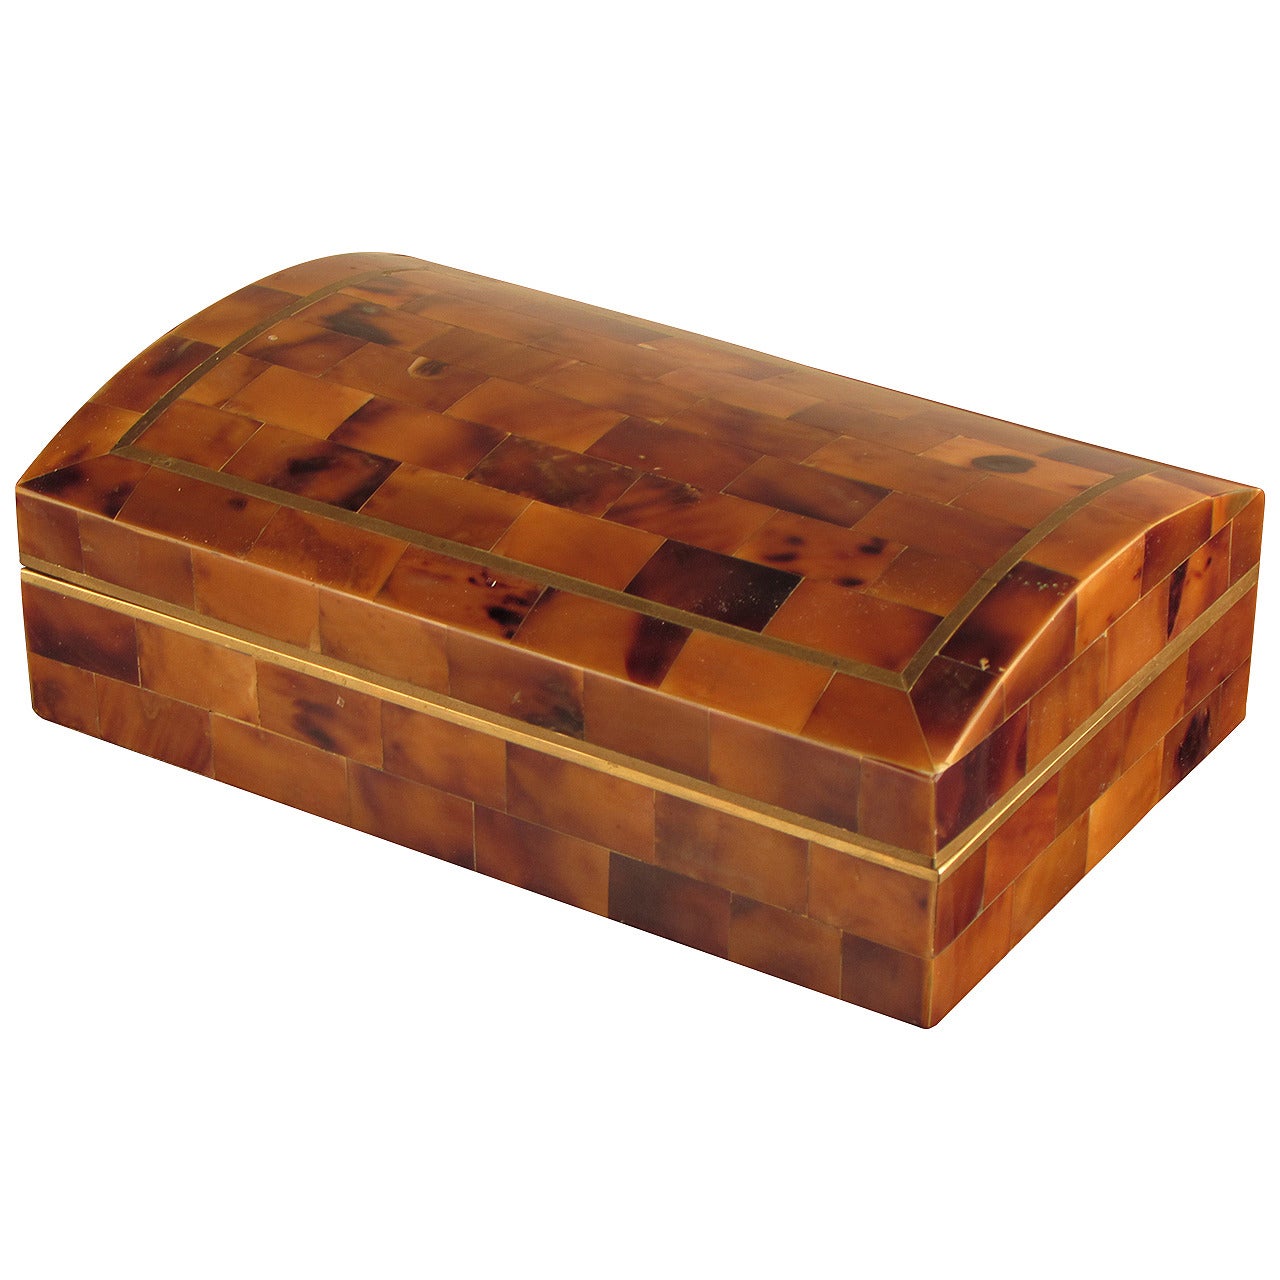 Handsome Tessellated Tortoise Shell Box with Brass Inlay by Maitland Smith